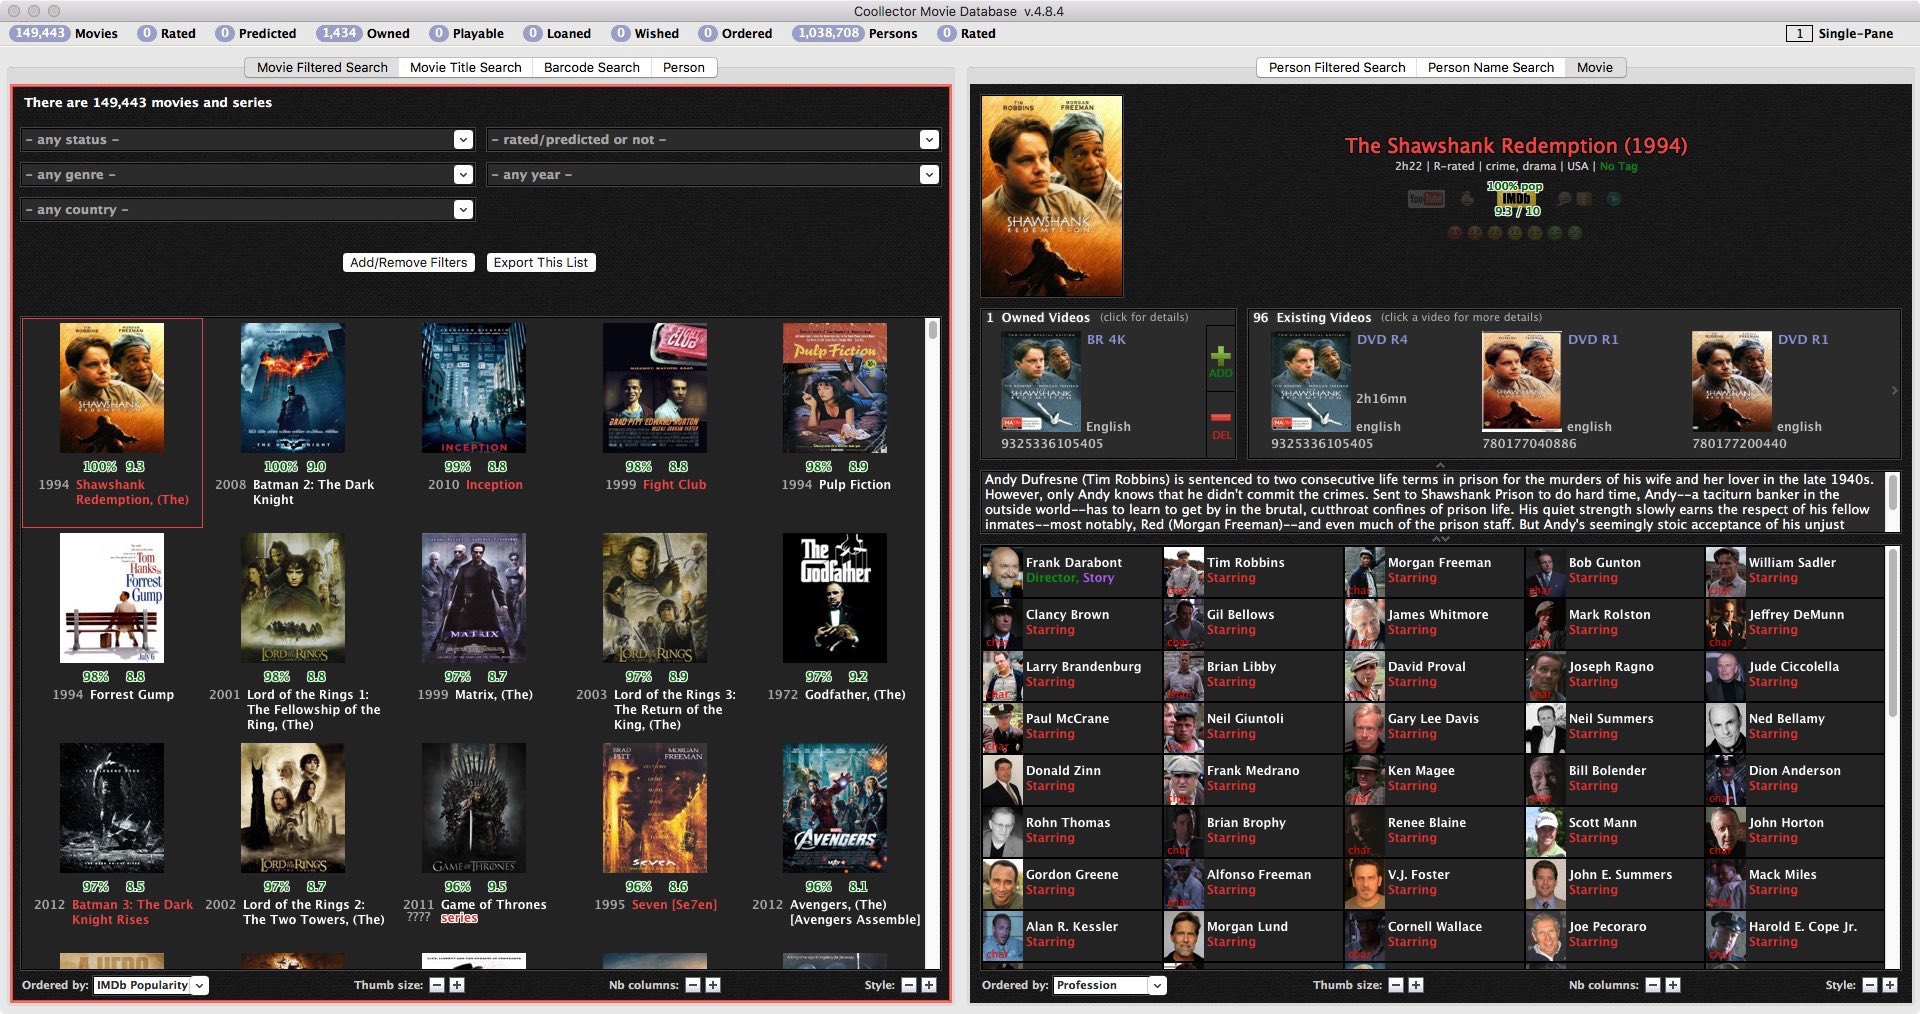 coollector movie database download